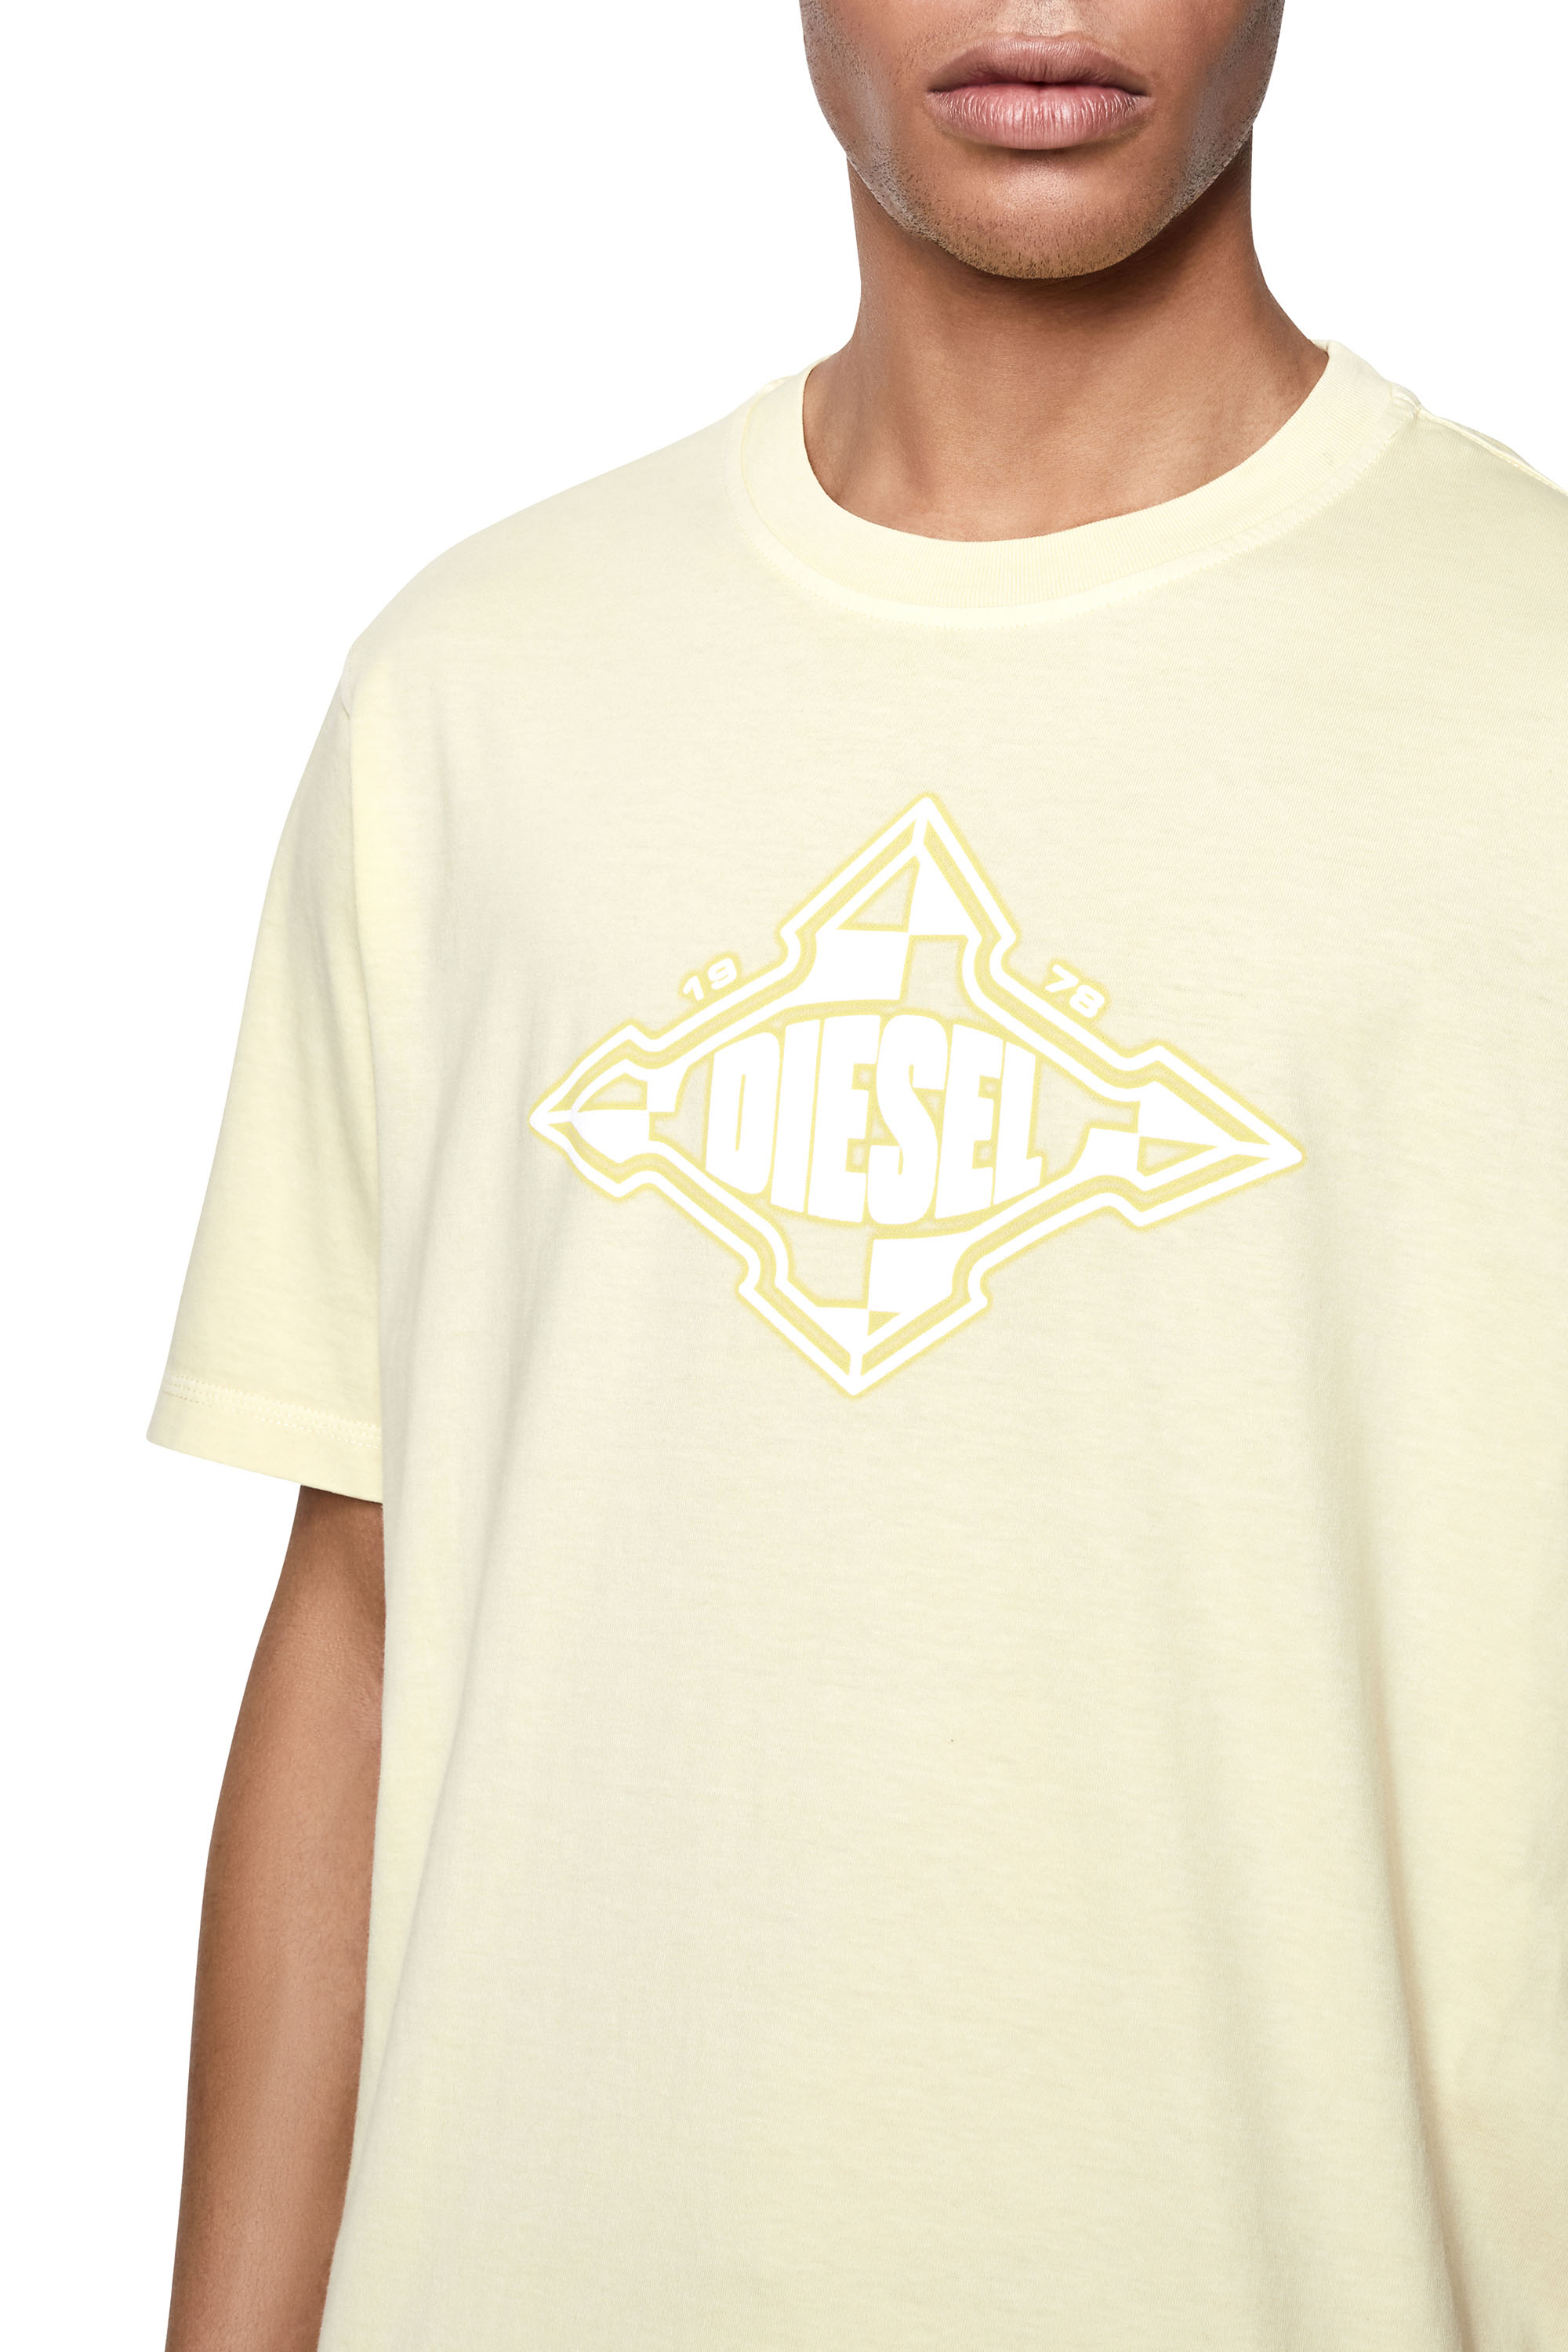 Diesel - T-JUST-D1, Yellow - Image 5